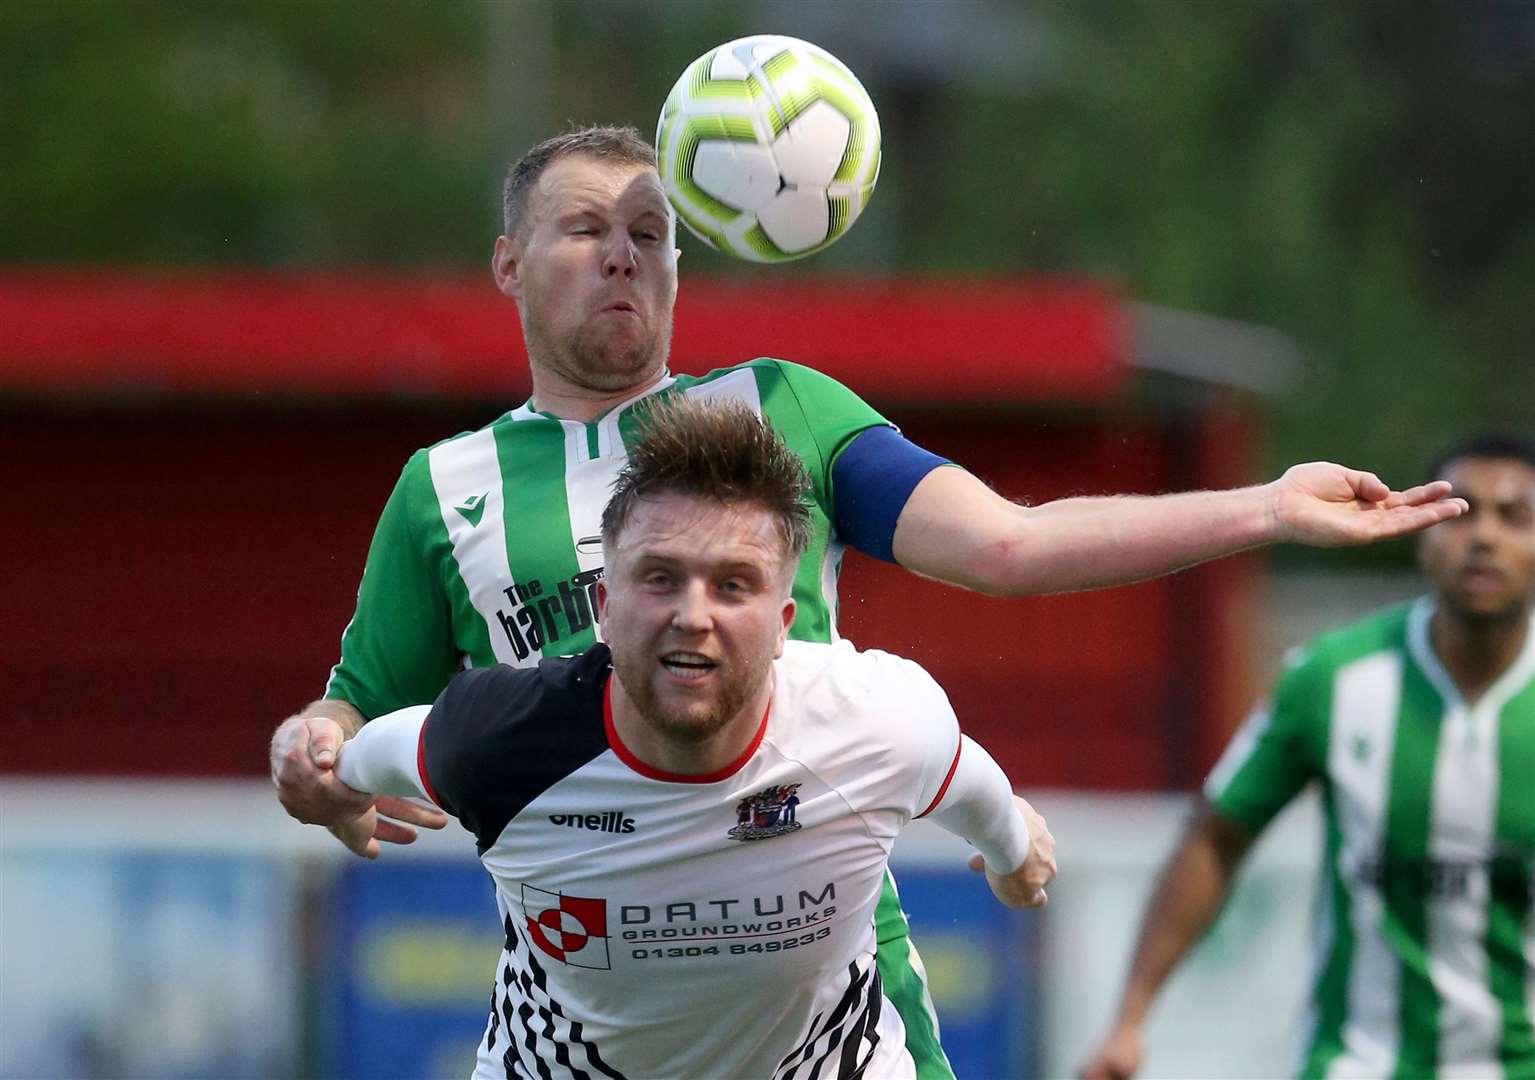 Deal Town Reserves and Rusthall Reserves tussle for the ball in the air. Picture: PSP Images